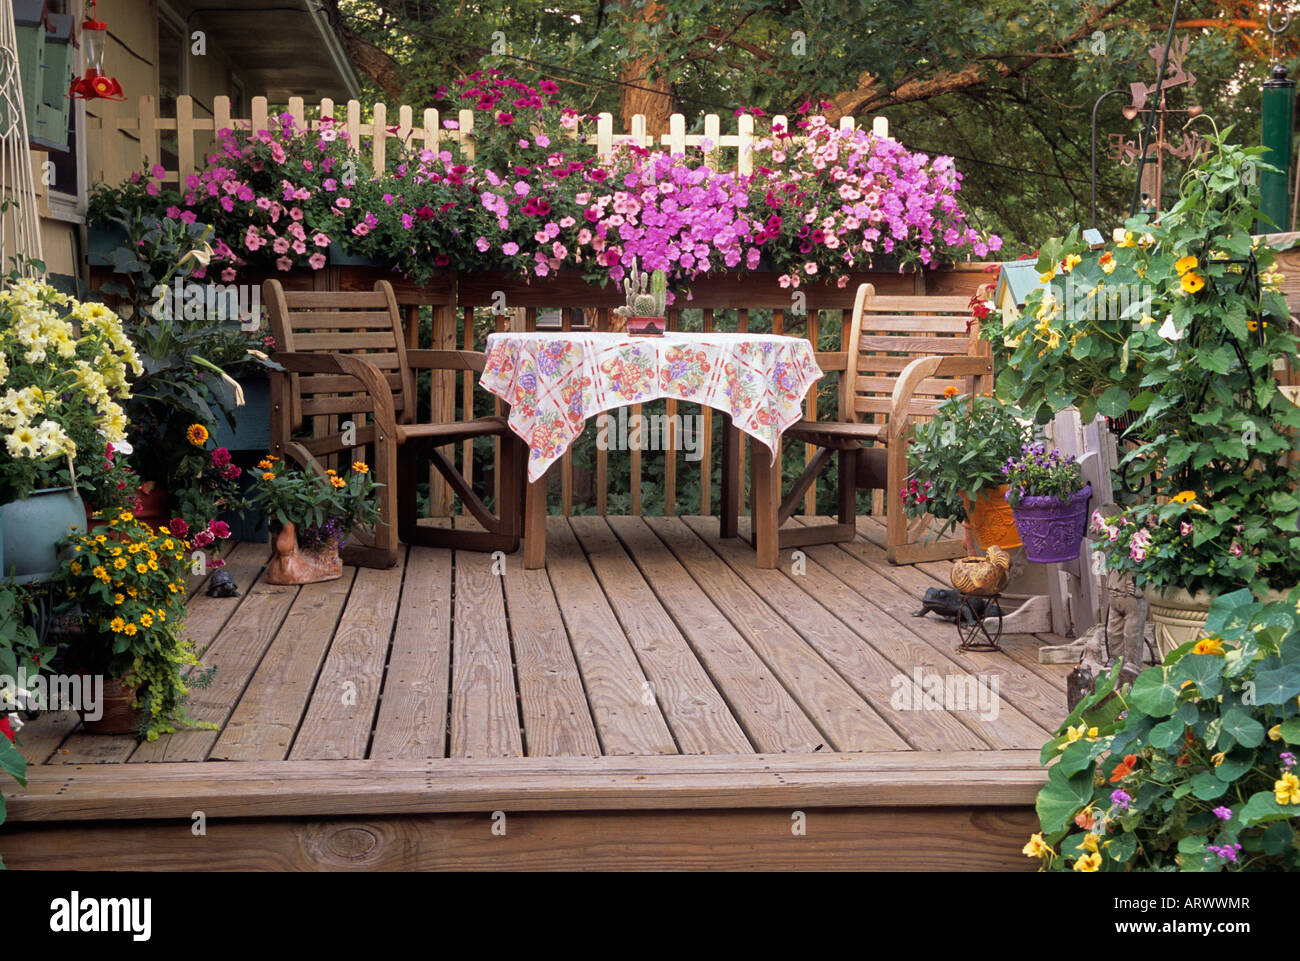 OUTDOOR DINING AREA ON DECK OF HOME. WAVE PETUNIAS, BLACK-EYED SUSAN VINES, IMPATIENS, NICOTIANA. SUMMER. Stock Photo